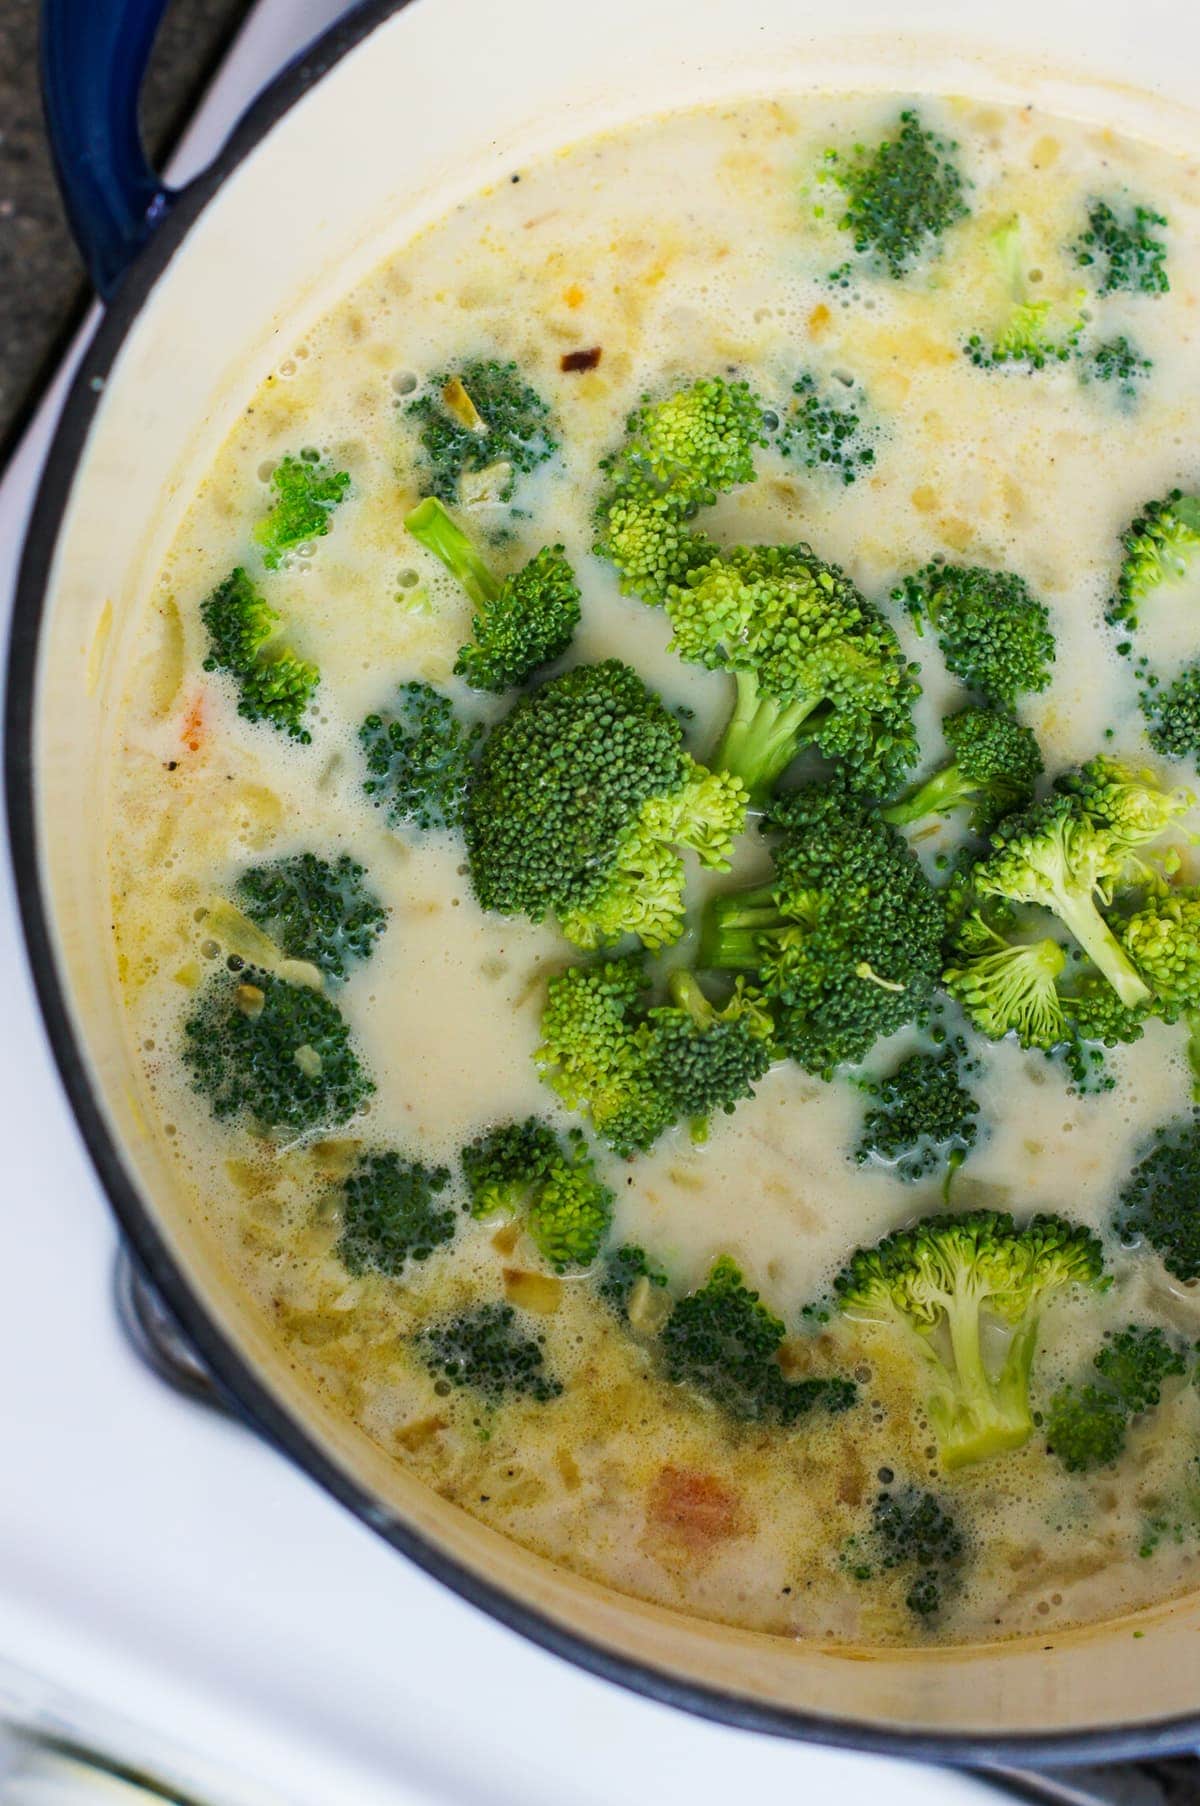 A simple cheese broccoli soup recipe that is easy to make and filled with delicious cheddar cheese, broccoli and carrots. mydominicankitchen.com #soup